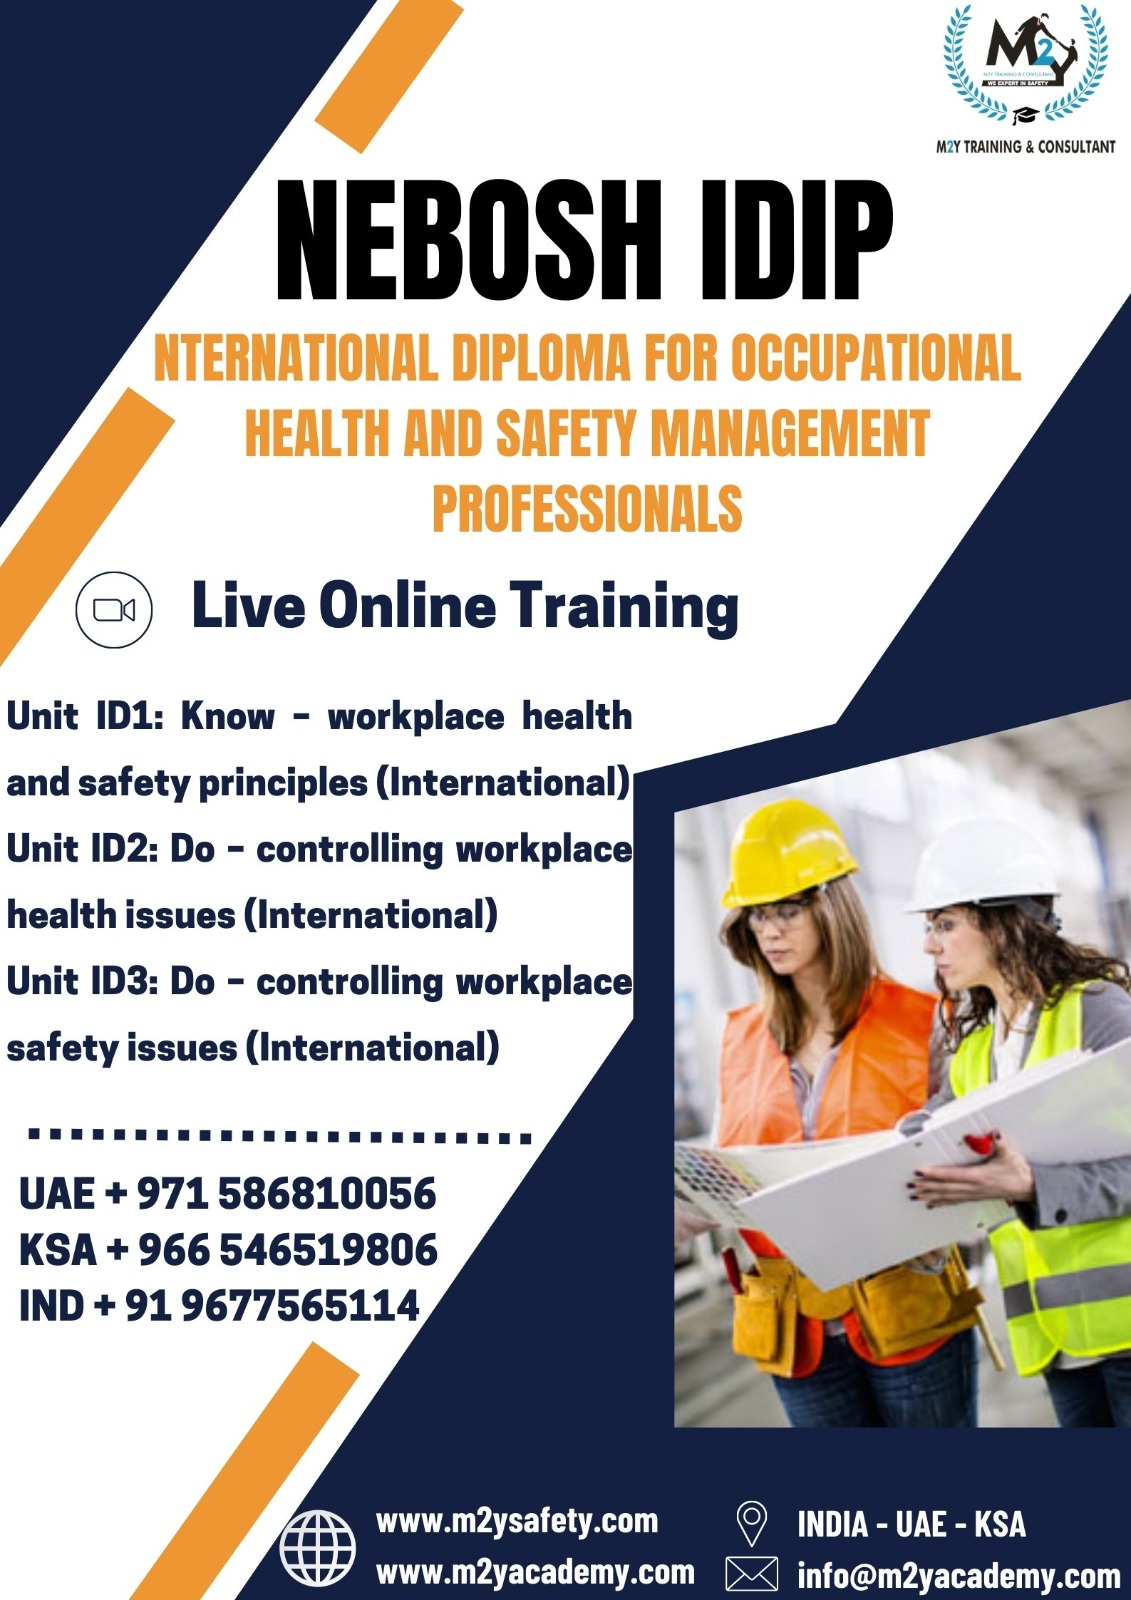  NEBOSH International Diploma for Occupational Health and Safety Management Professionals